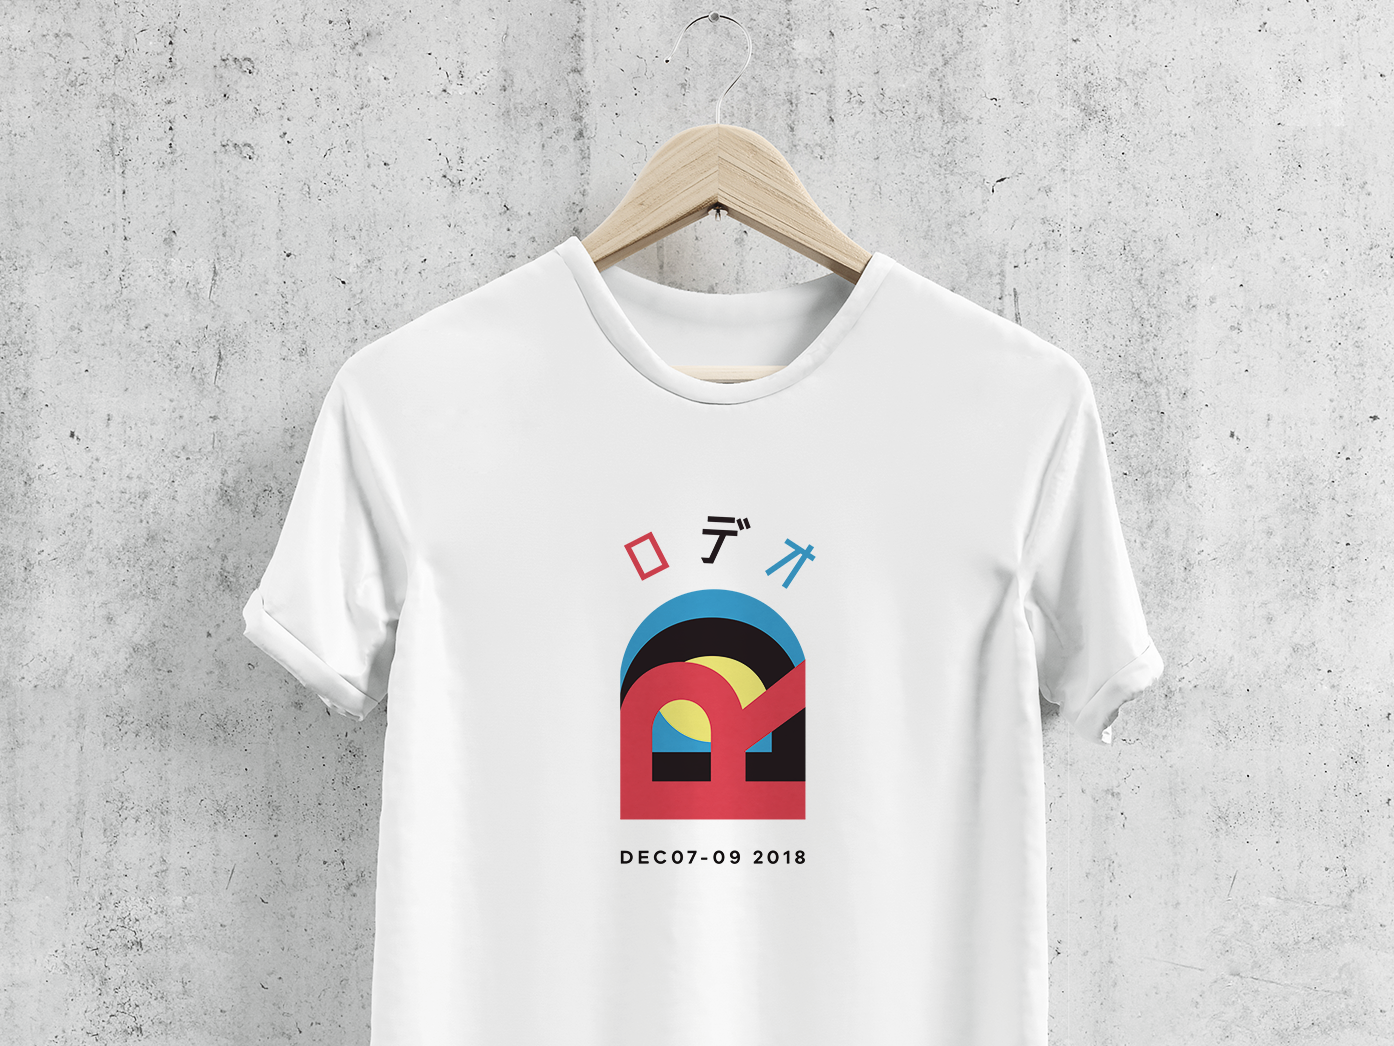 Rodeo T-shirt Design by noko washiyama for Two Bulls on Dribbble